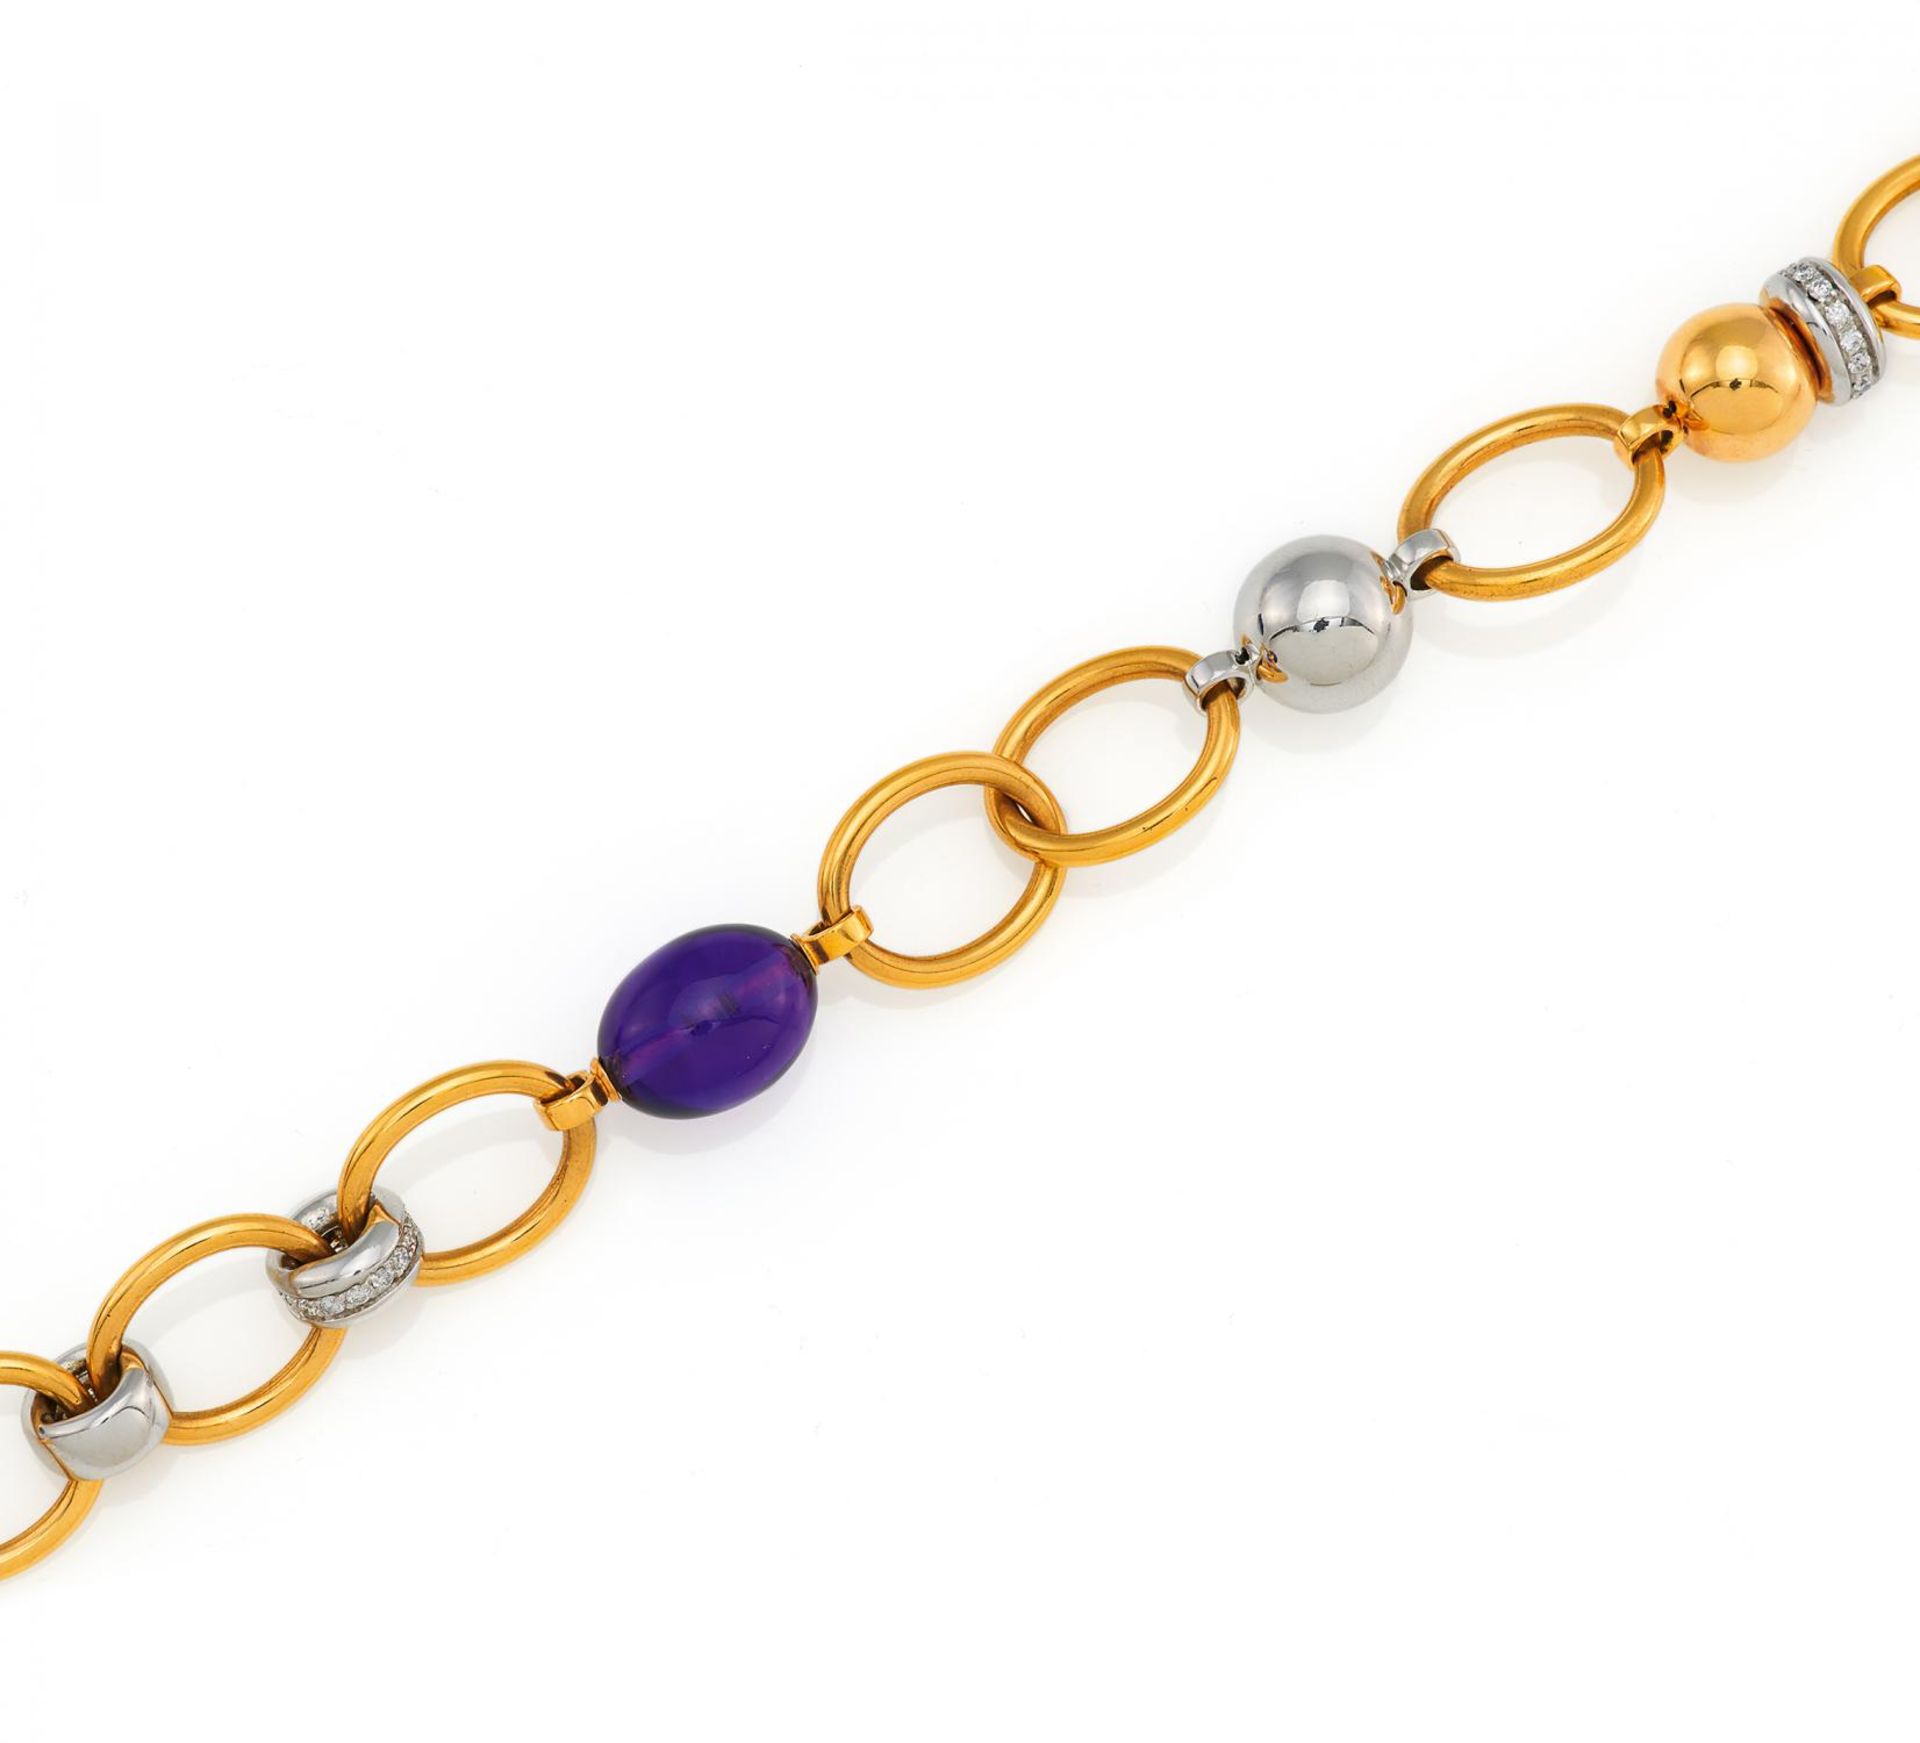 AMETHYST-DIAMOND-BRACELET. Origin: Germany. Date: 2000s. Material: 750/- white- and rose gold. Total